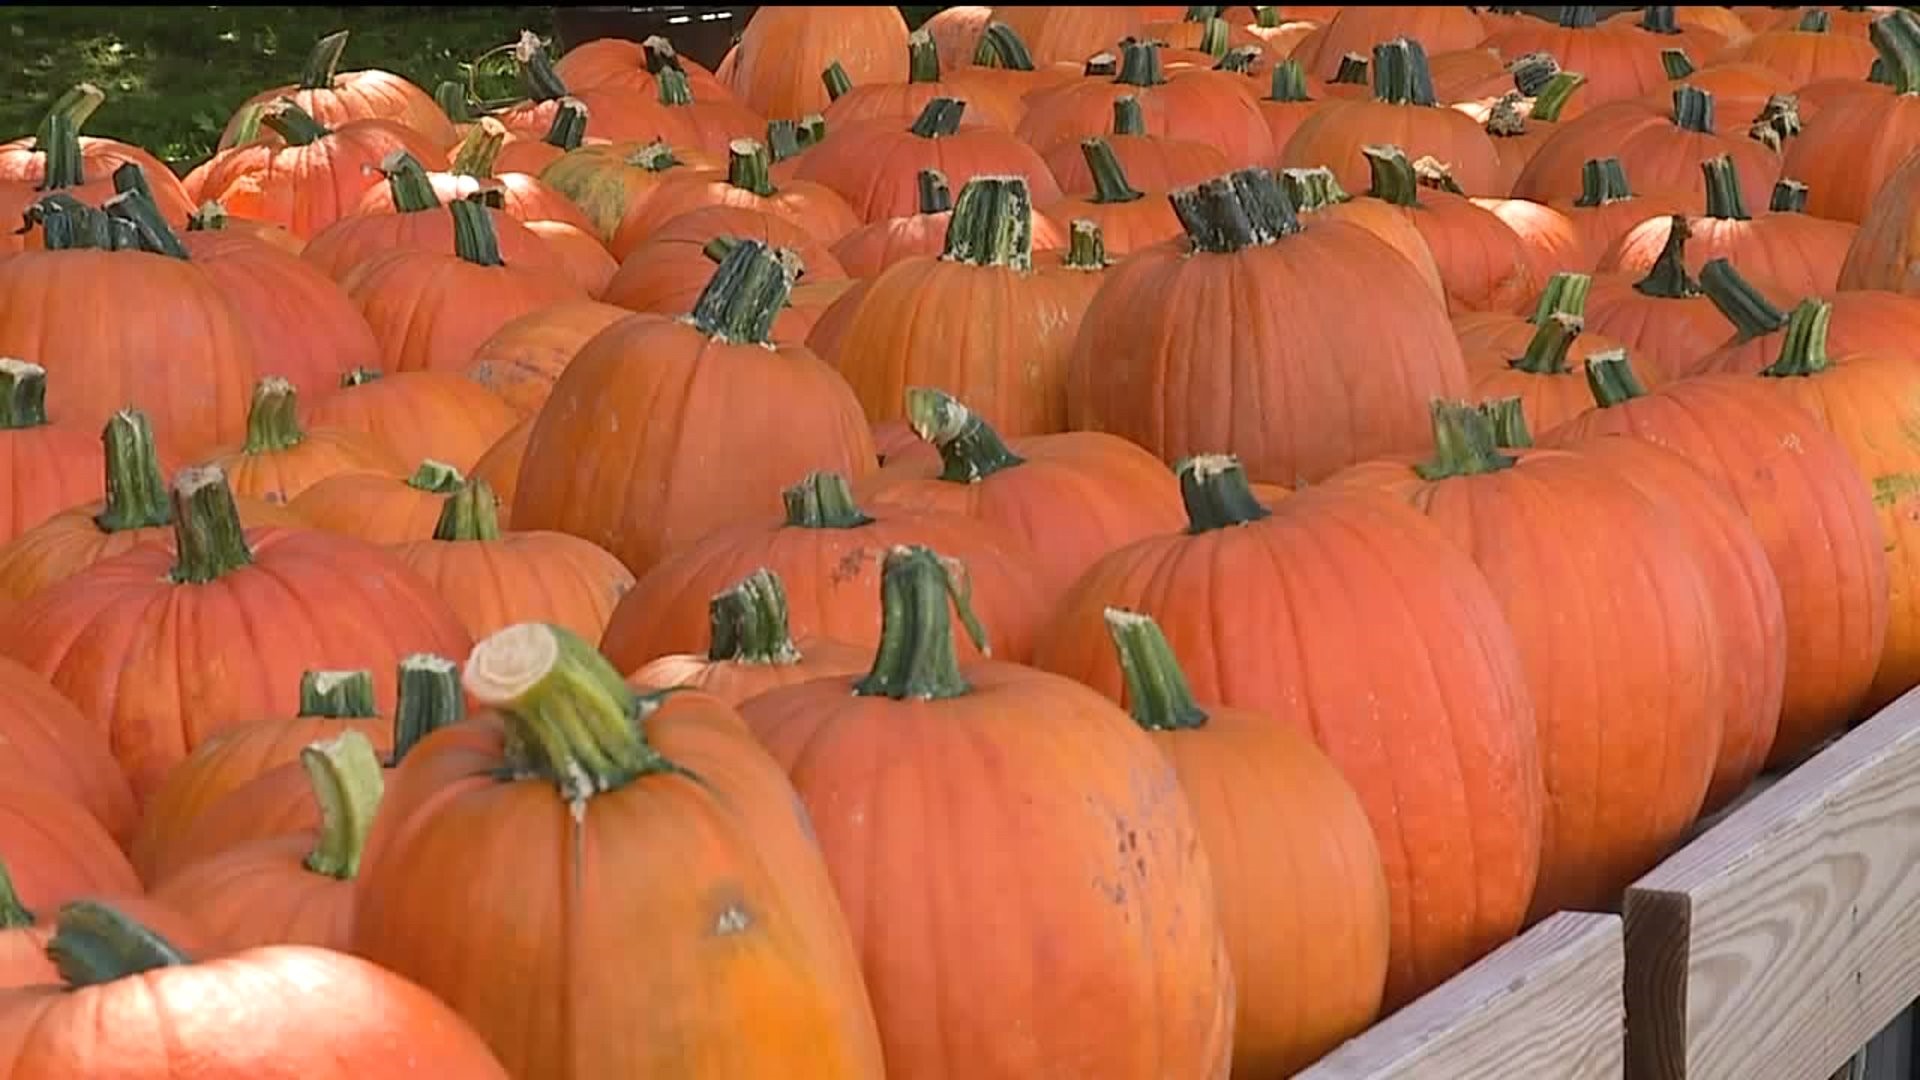 Pumpkins for Pigs: Recycling Your Halloween Leftovers